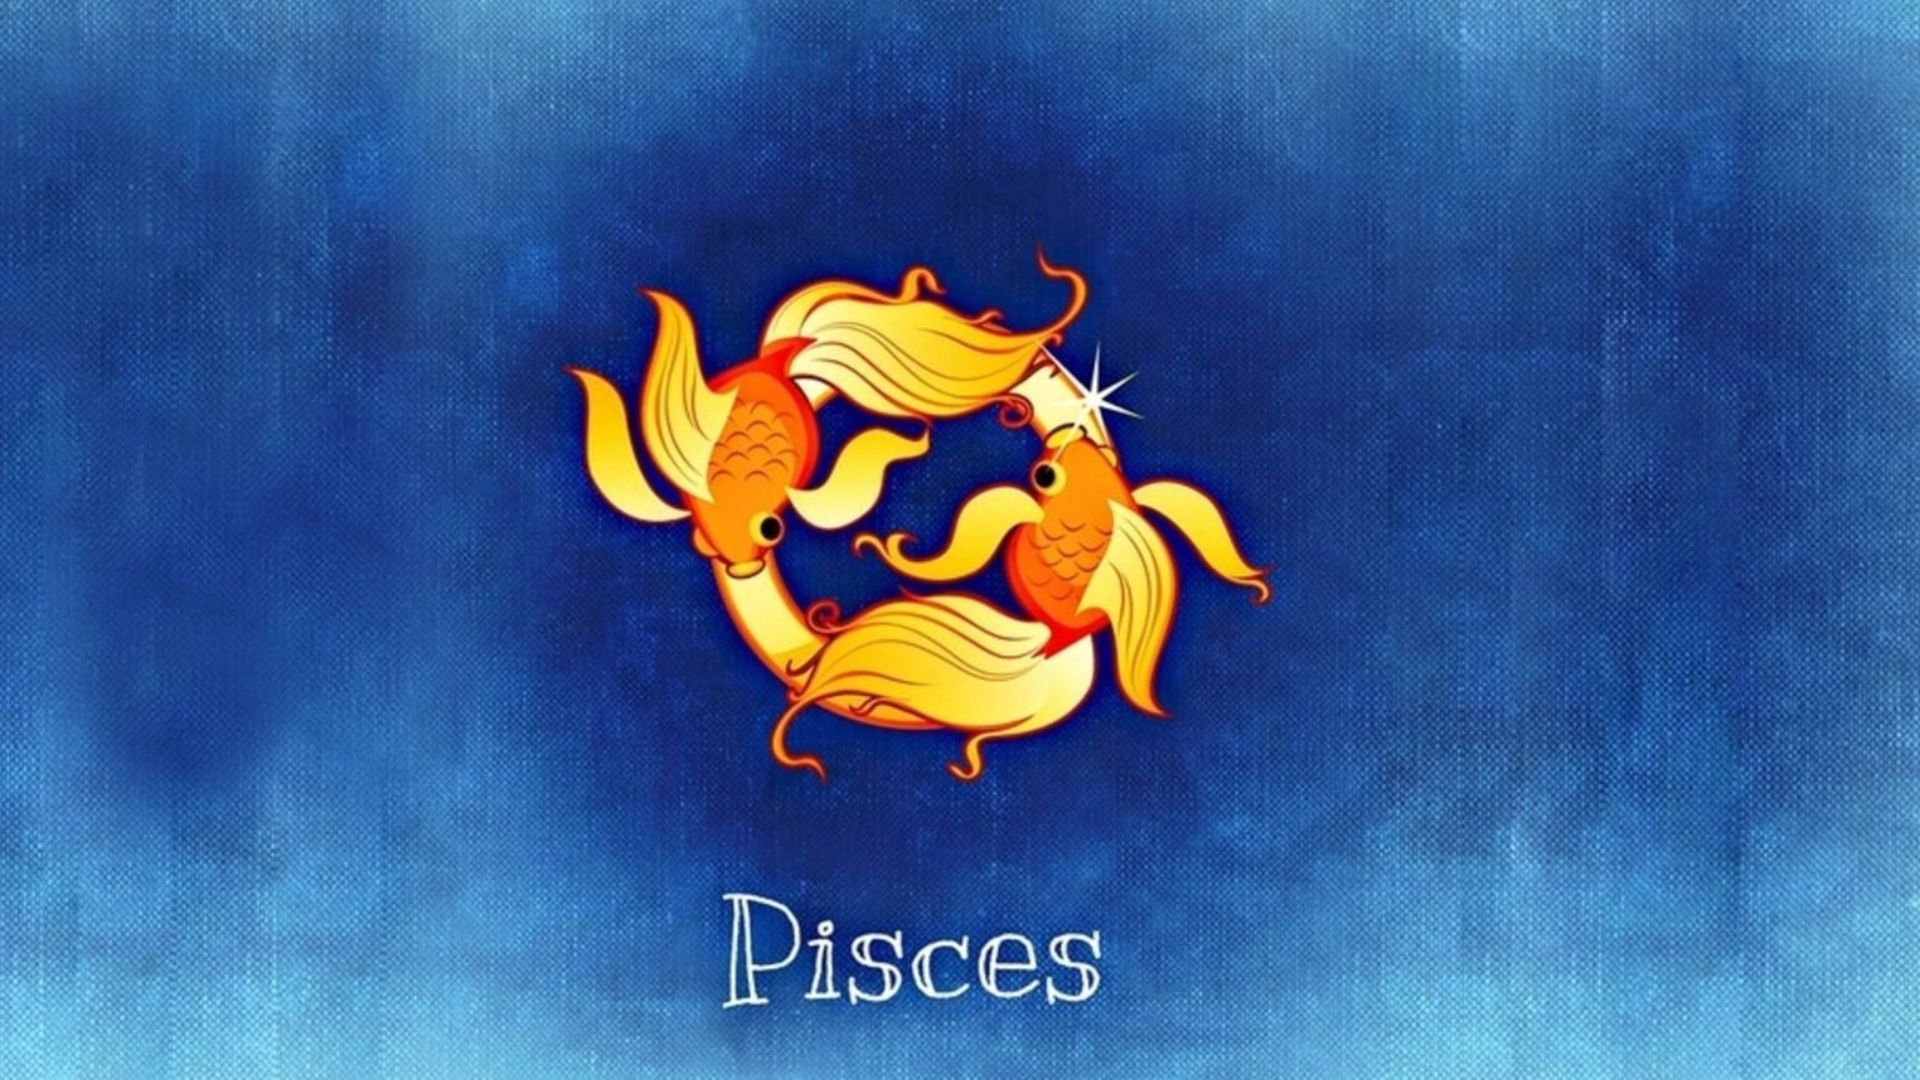 Golden Fishes Representing Pisces